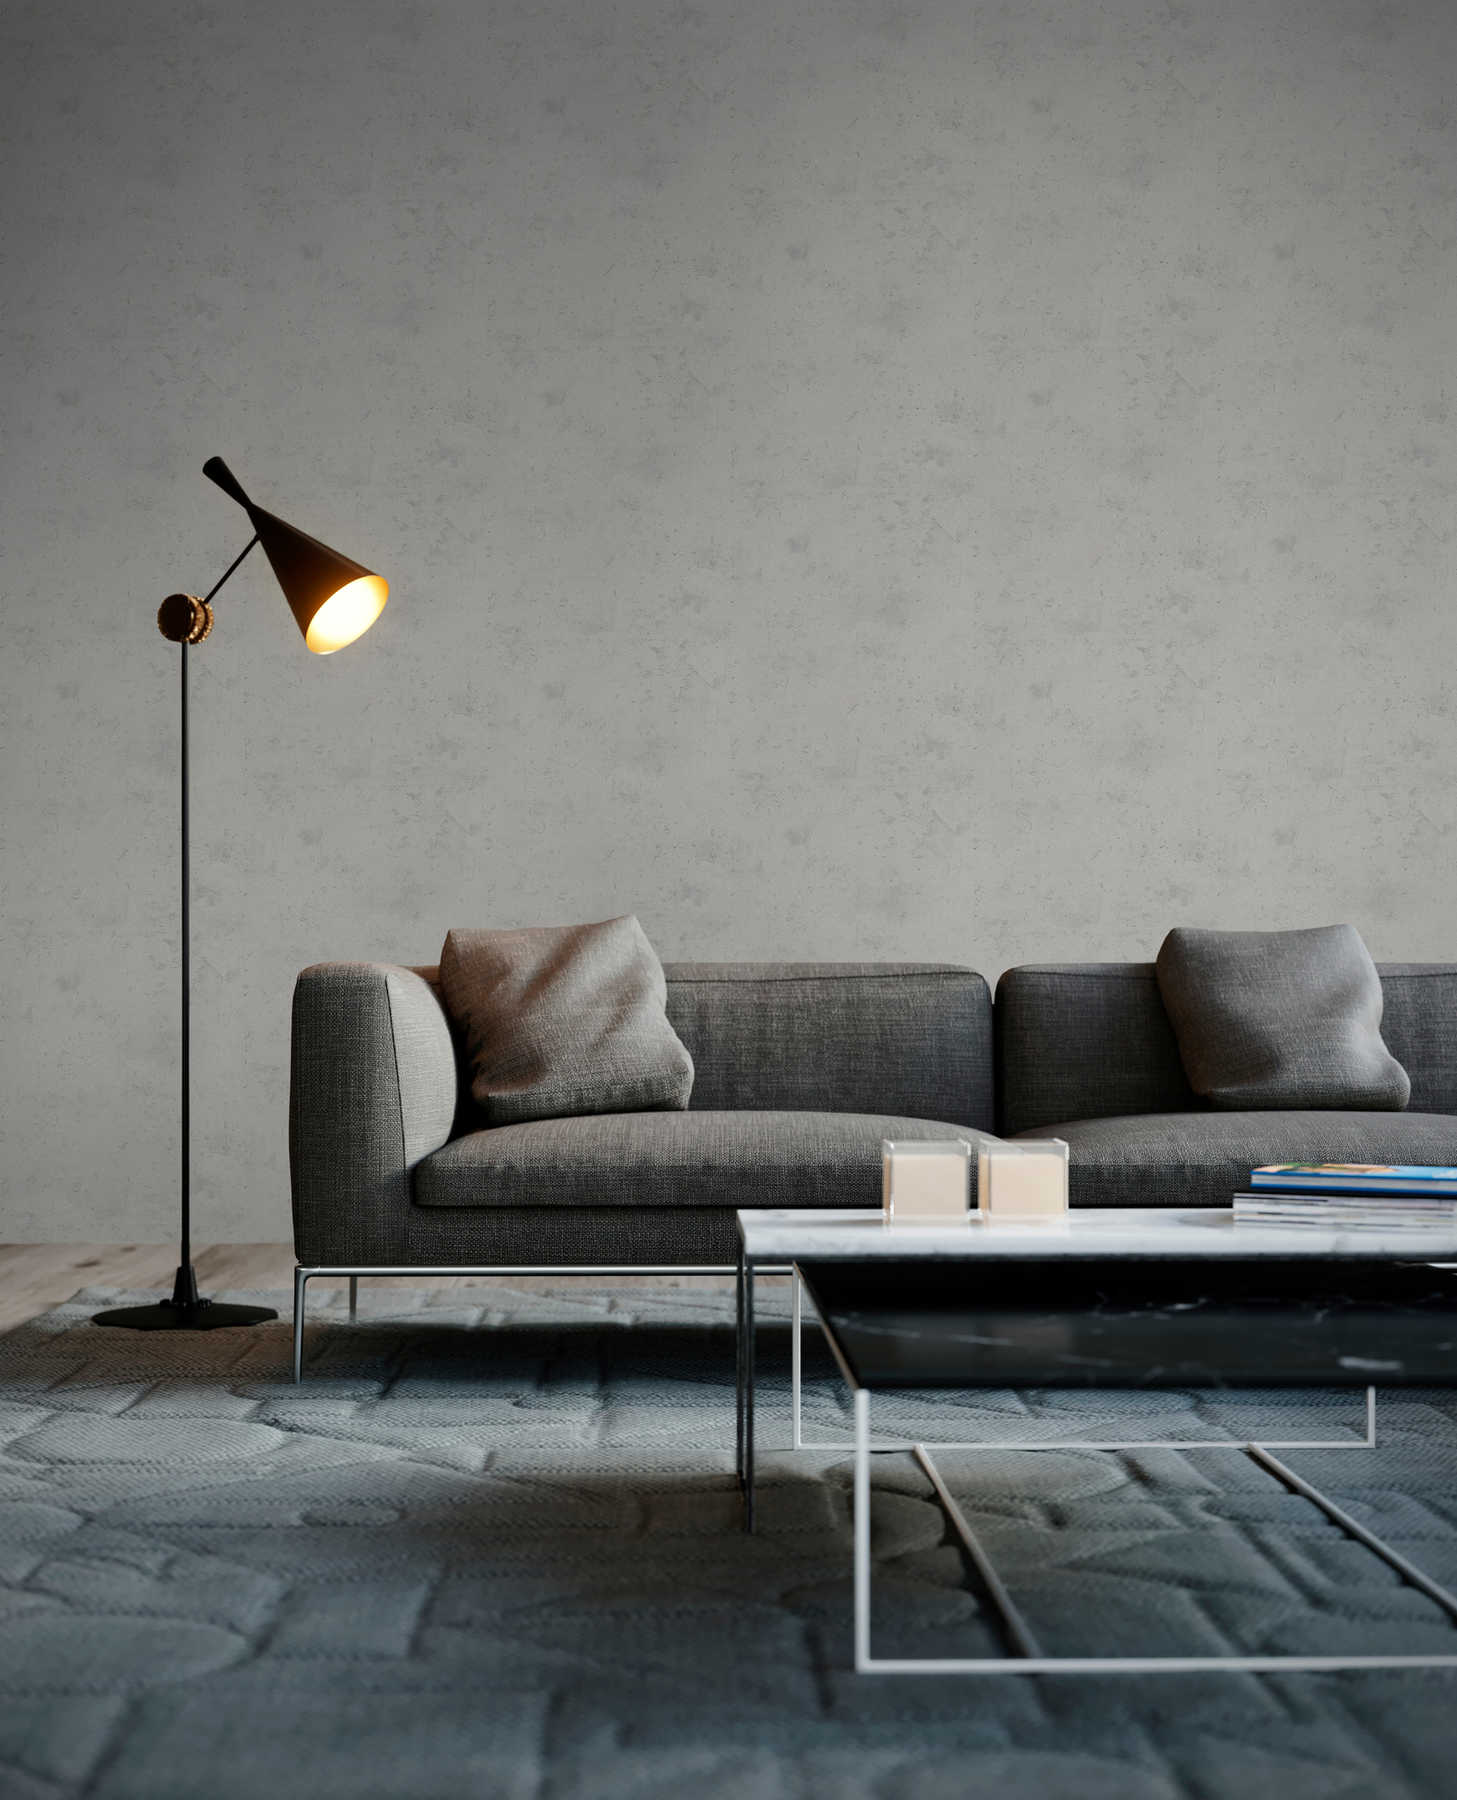             Concrete wallpaper in industrial style - white-grey
        